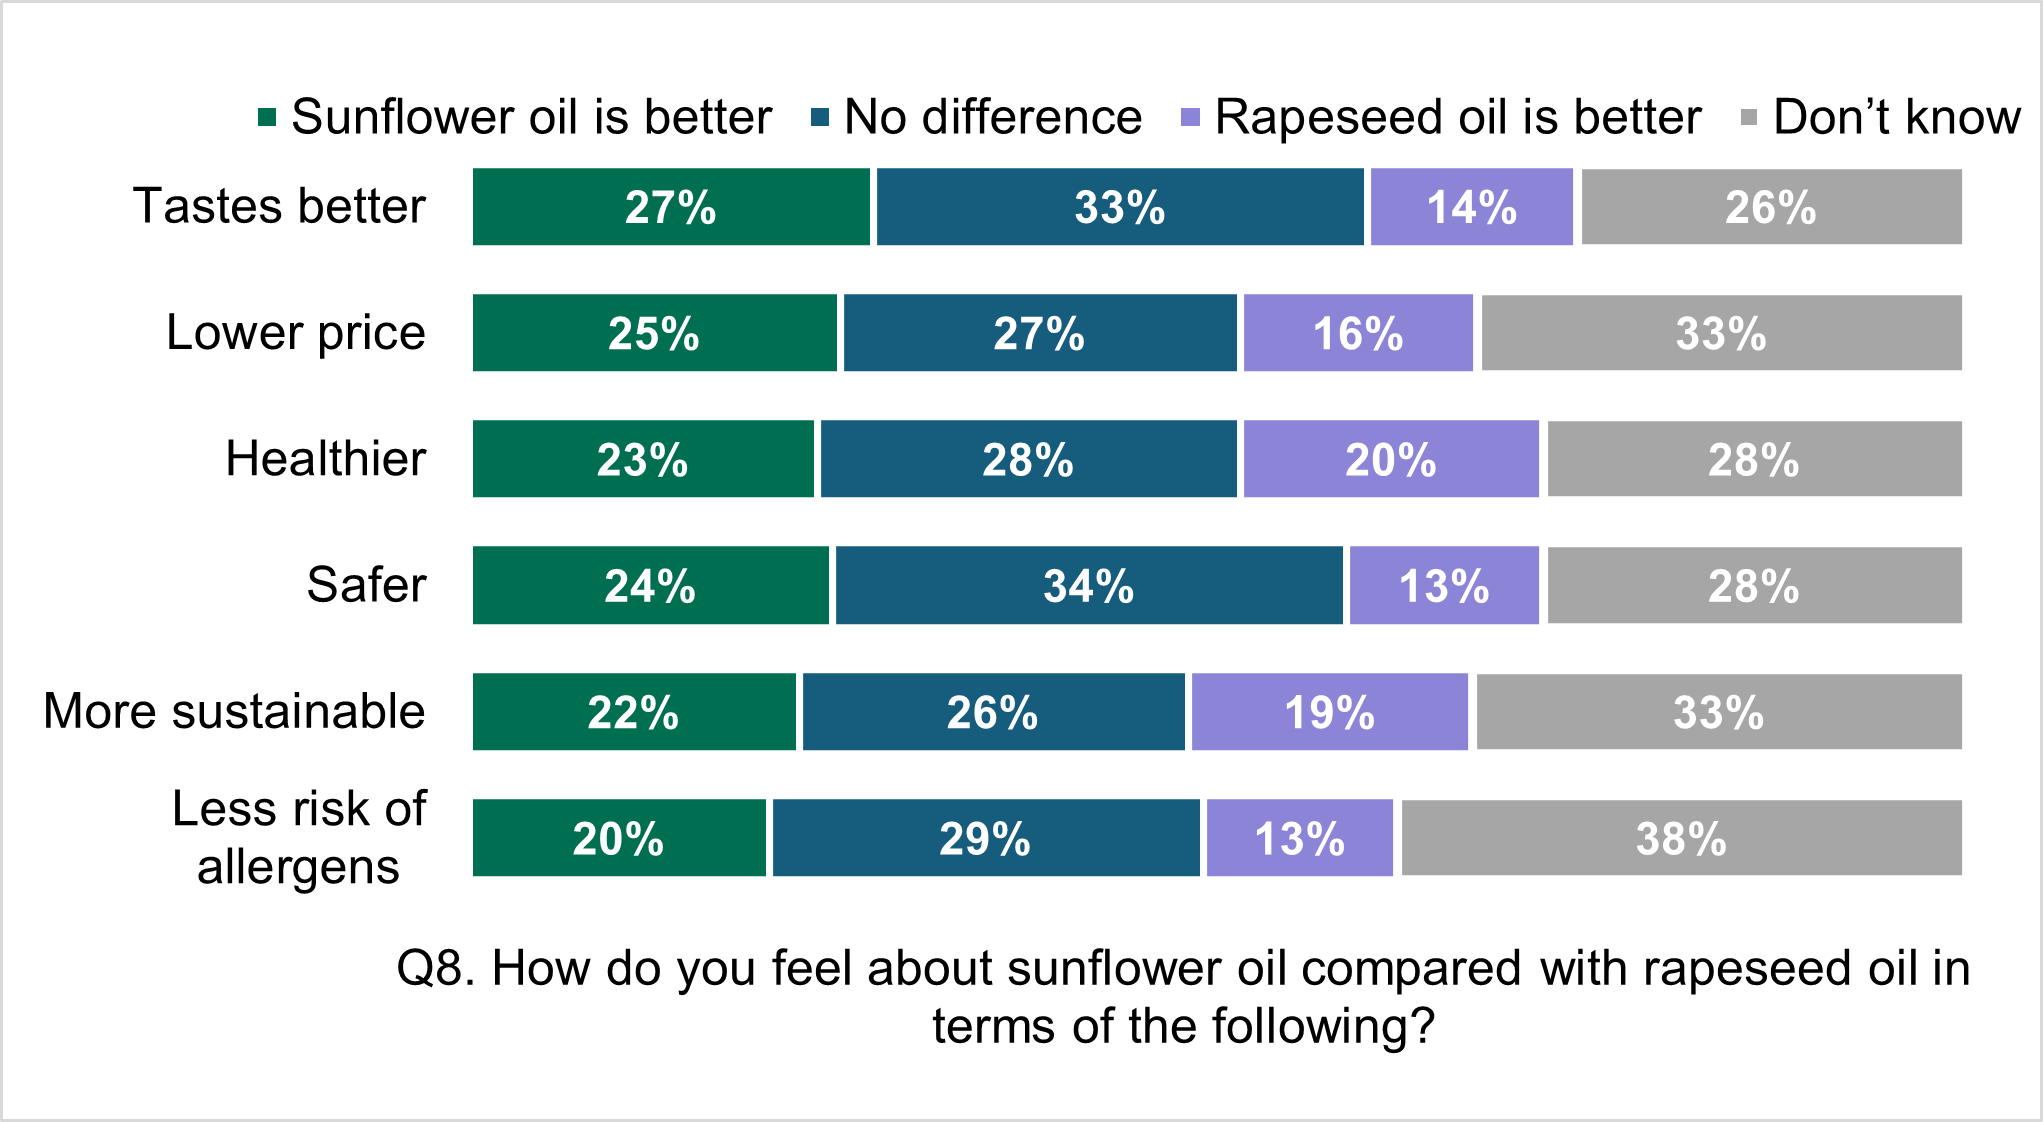 Consumer perceptions of sunflower oil and rapeseed oil, 33% believe there is no difference between the two and 34% think sunflower oil is safer. 